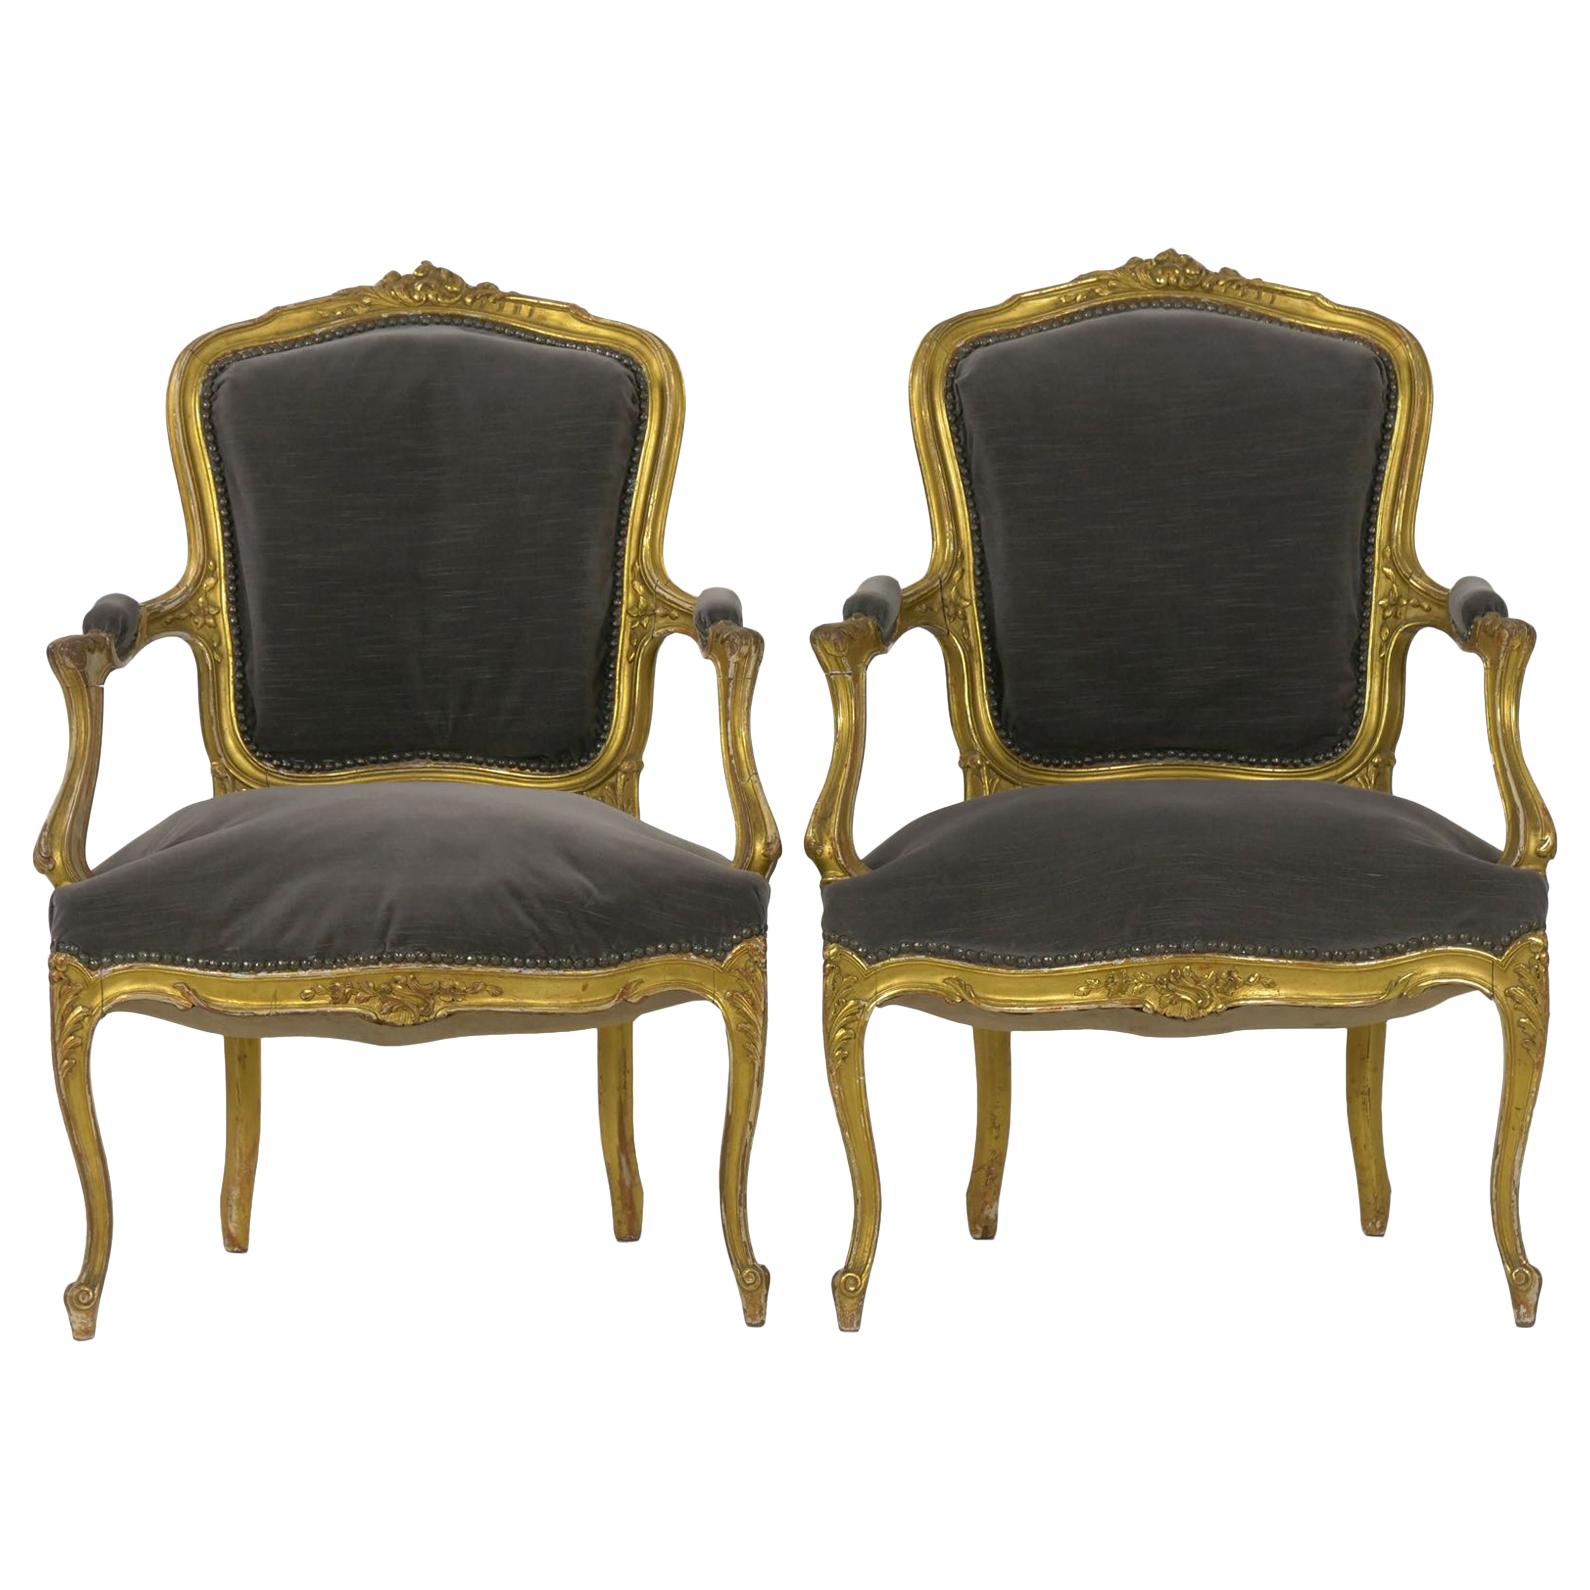 Pair of French Louis XV Style Carved Giltwood Antique Armchairs, circa 1900